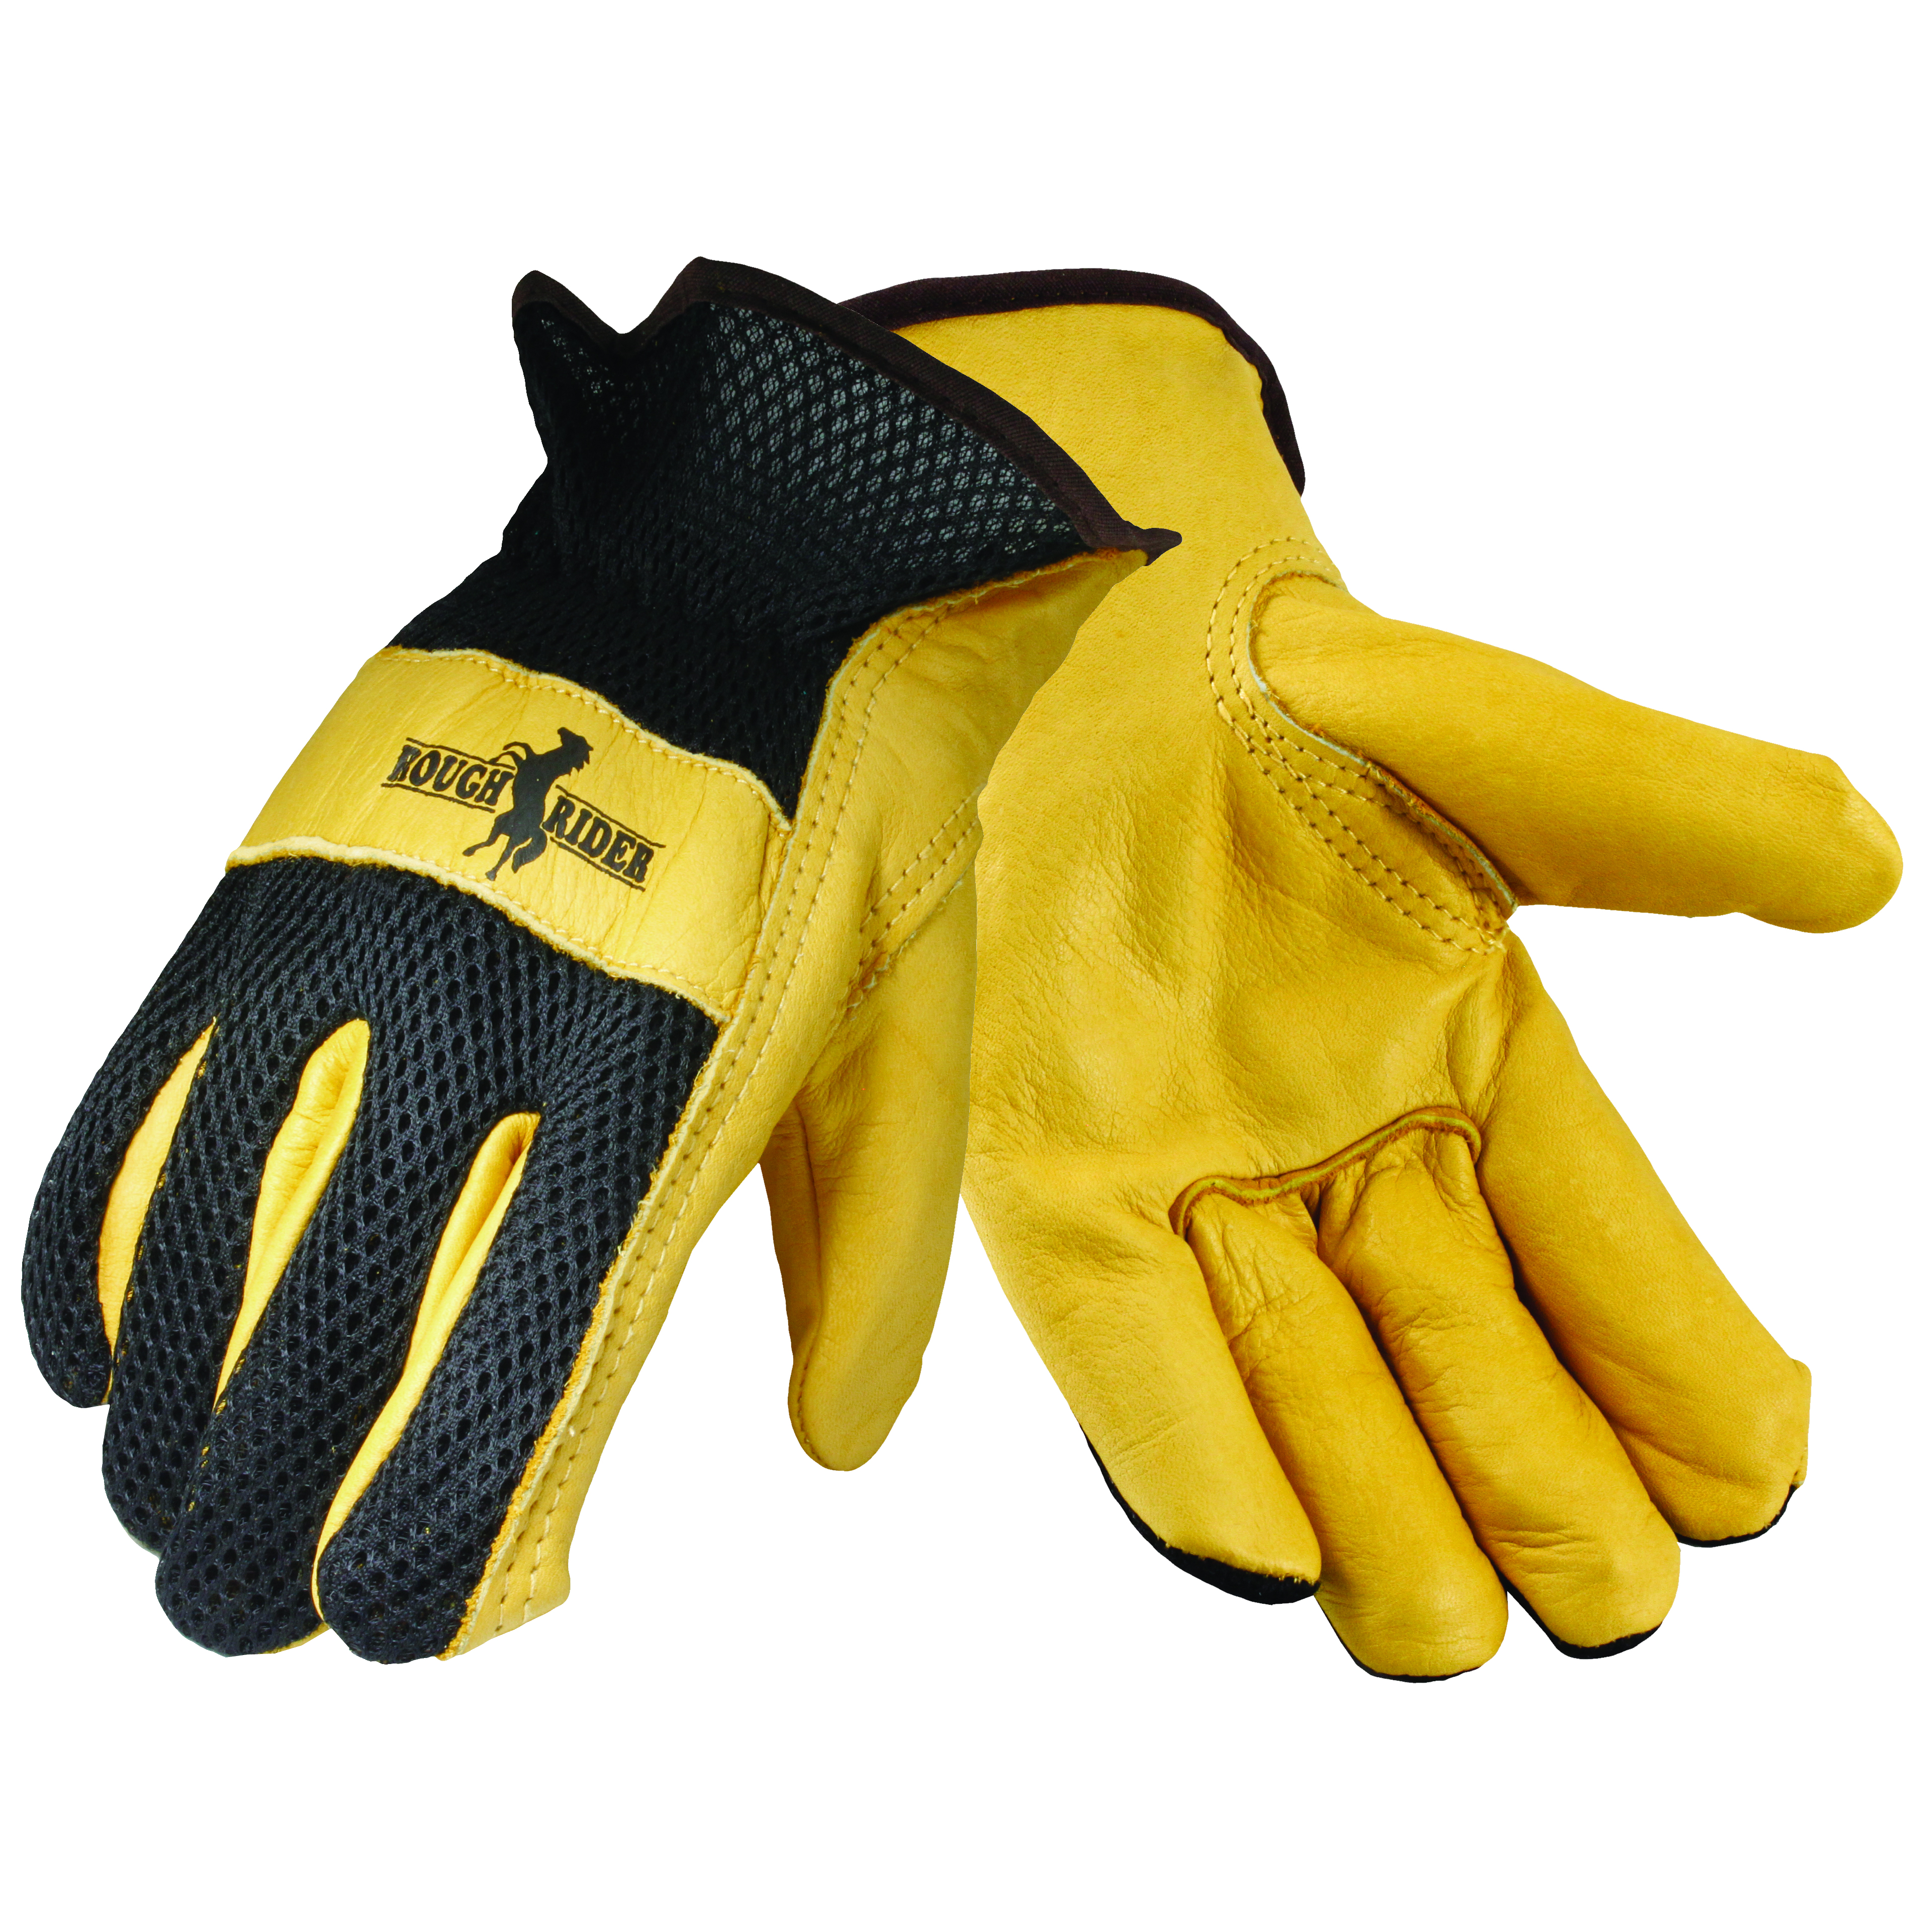 Rough Rider&reg; Mesh Back Driver Gloves, 3 Pairs/Package